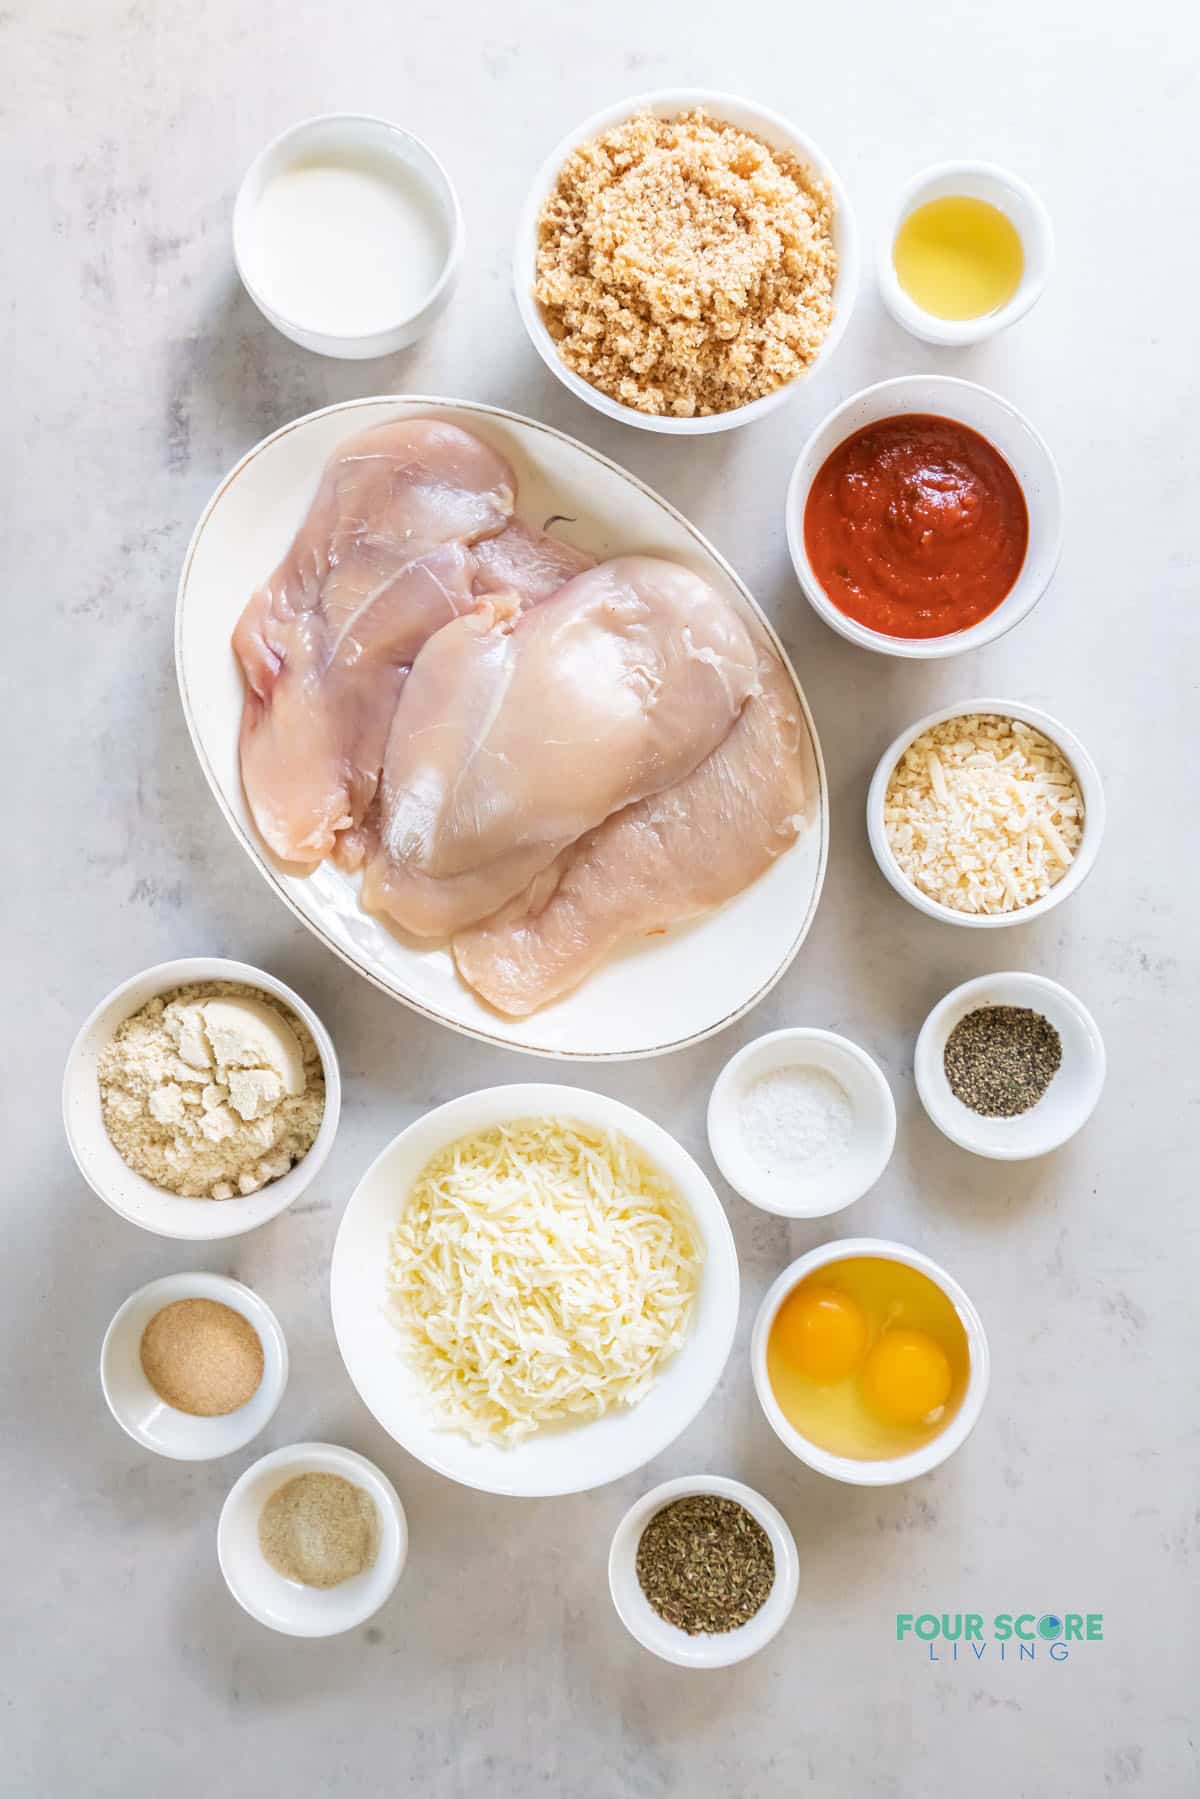 All of the ingredients you need to make keto chicken parmesan with chicken breasts. Each ingredient is measured into a bowl, and arranged on a counter, viewed from above